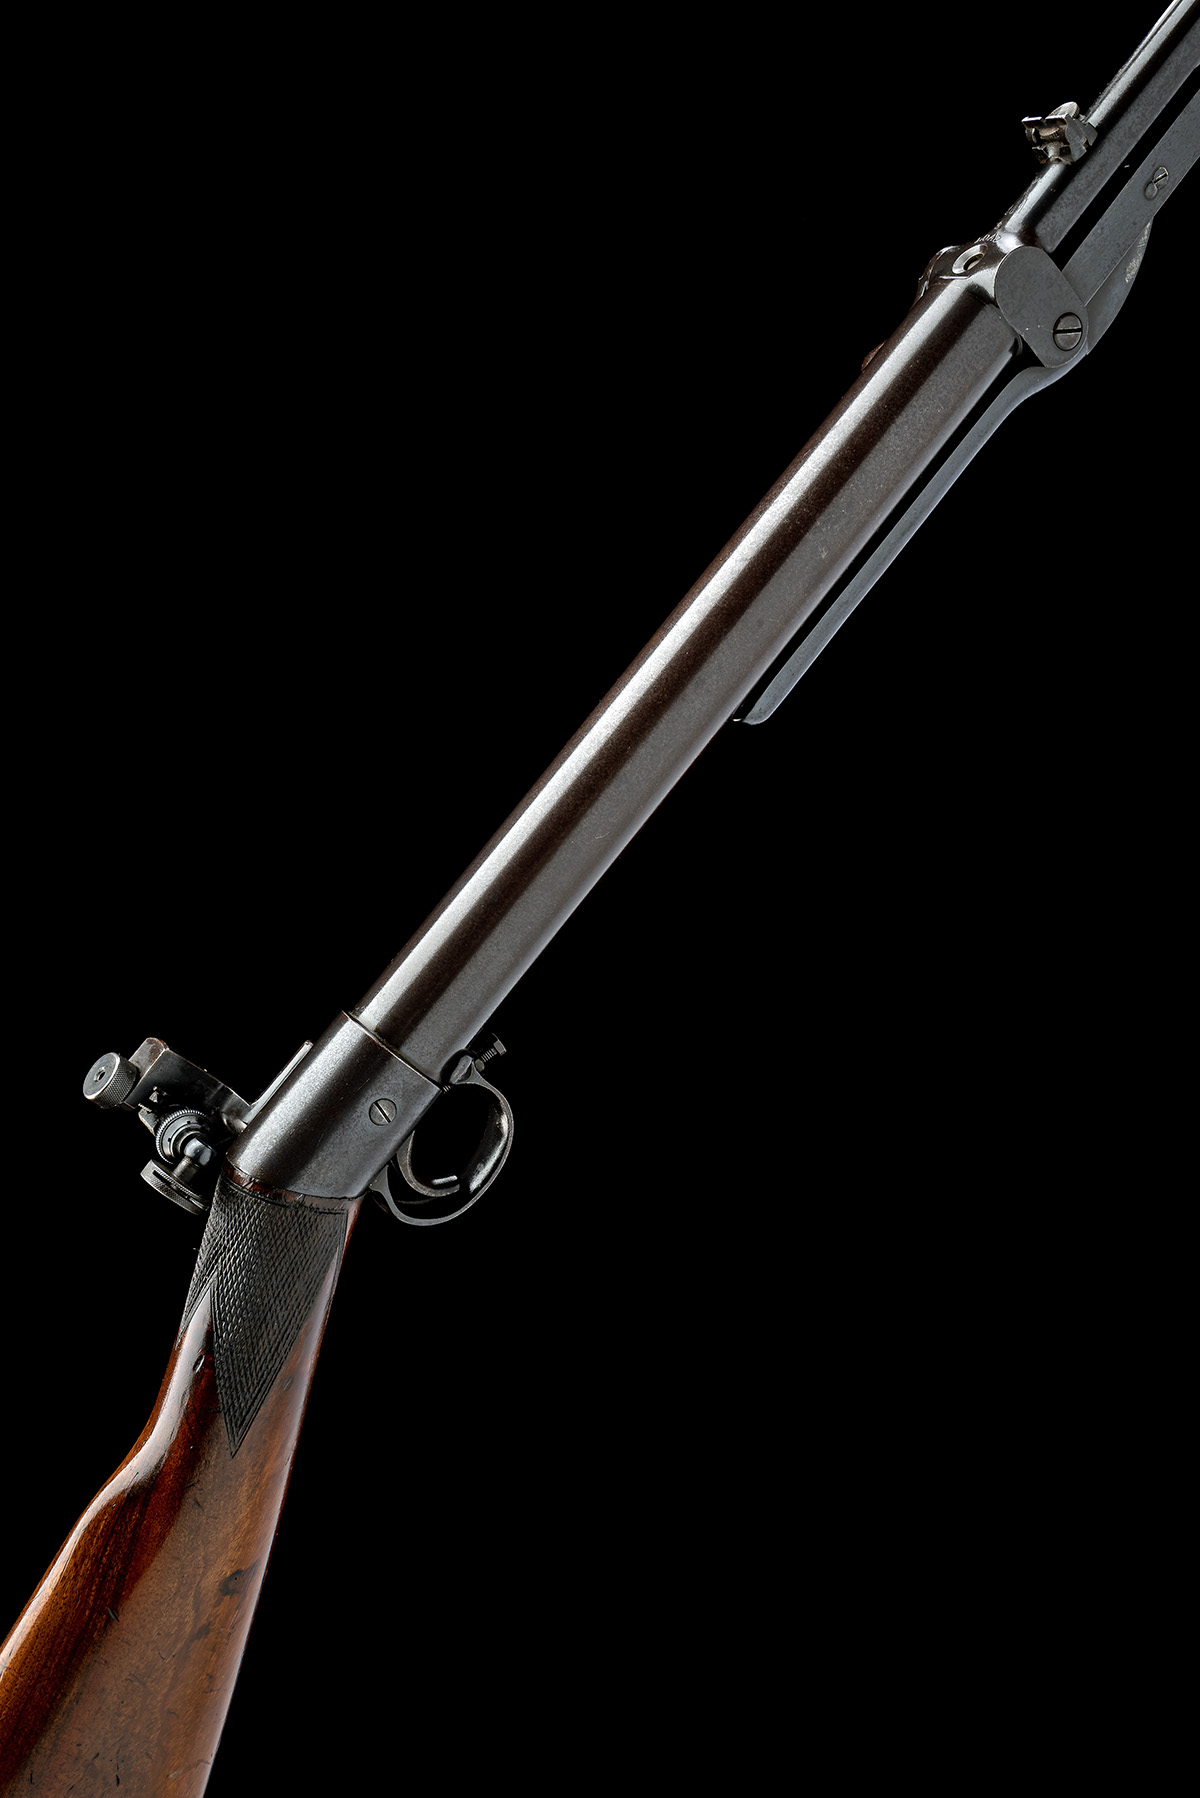 A .22 BSA STANDARD PRE-WAR UNDER-LEVER AIR-RIFLE OF IMPROVED MODEL 'D' TYPE, serial no. S72019,